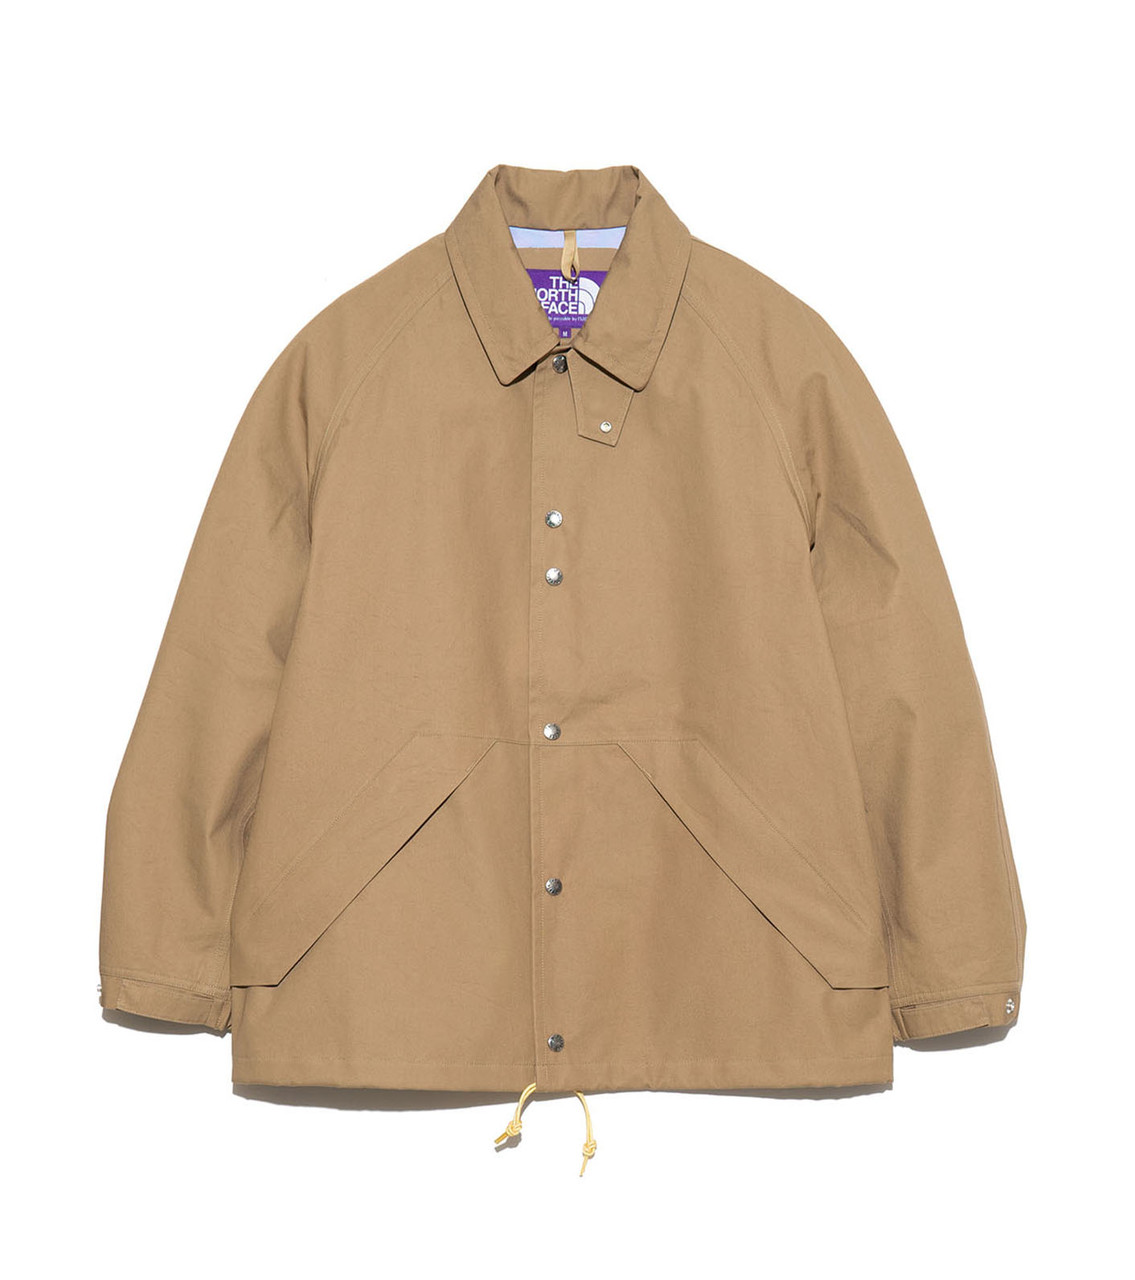 THE NORTH FACE PURPLE LABEL JACKET GORE-TEX Field Jacket Online 